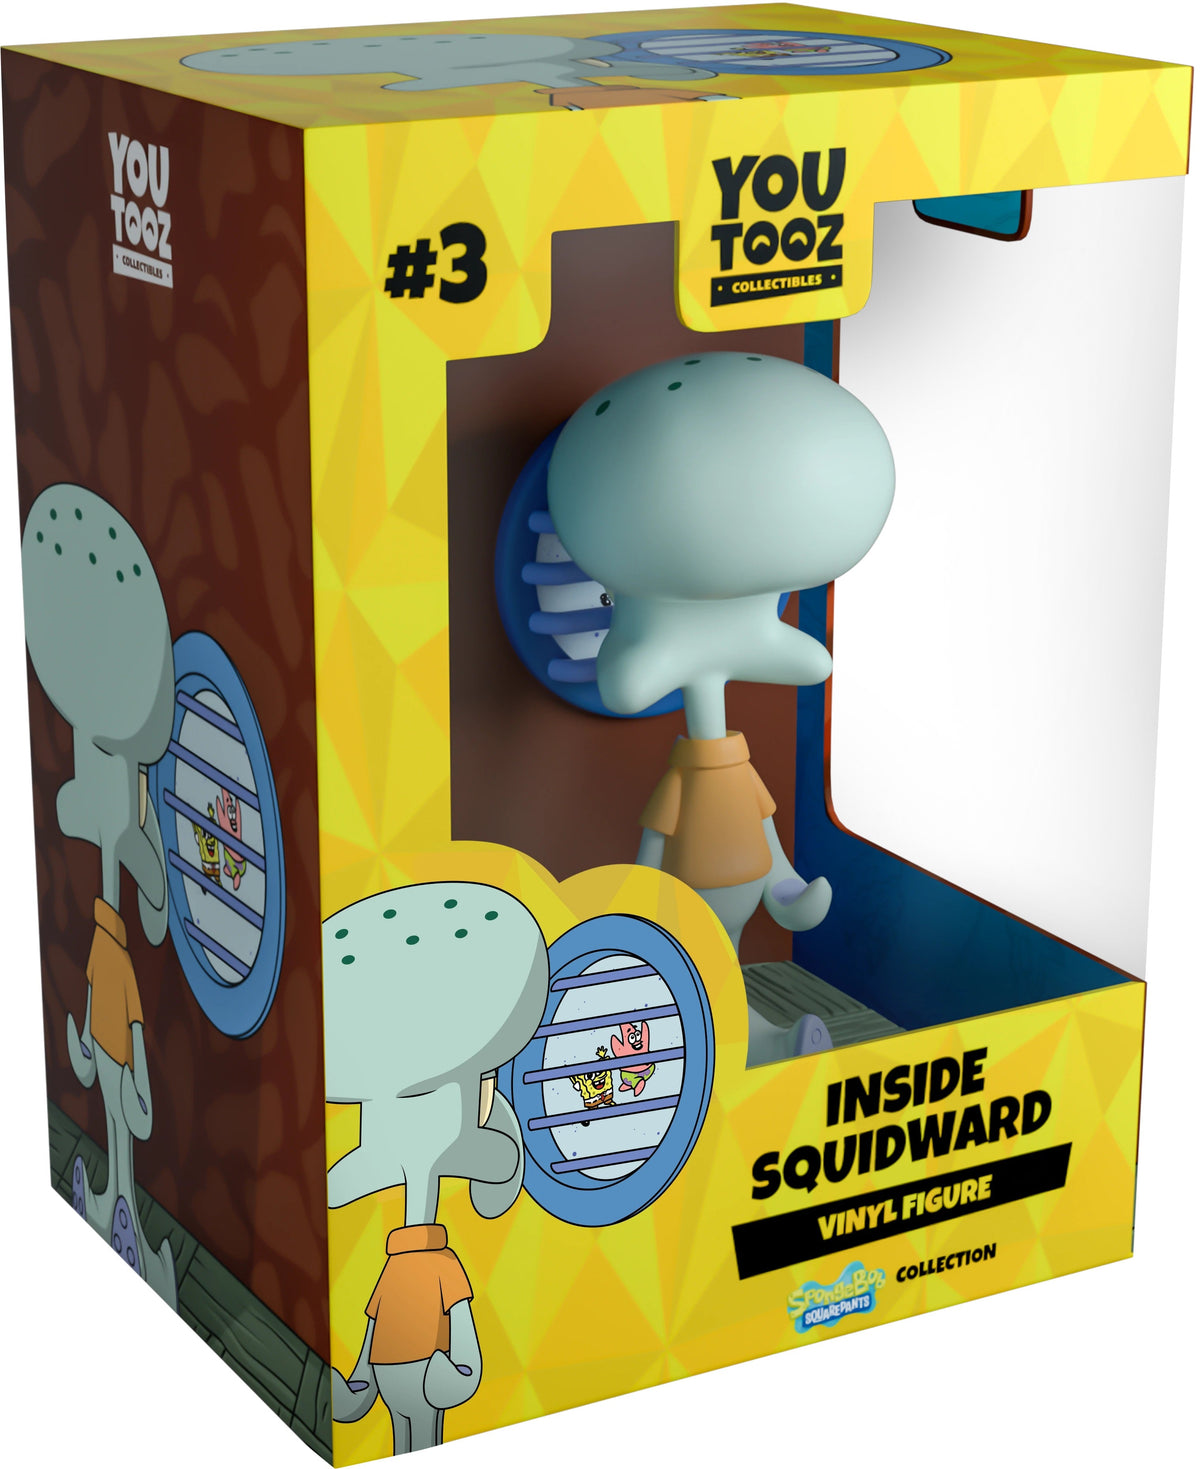 Spongebob Squarepants: Inside Squidward Toy Figure by Youtooz Collectibles